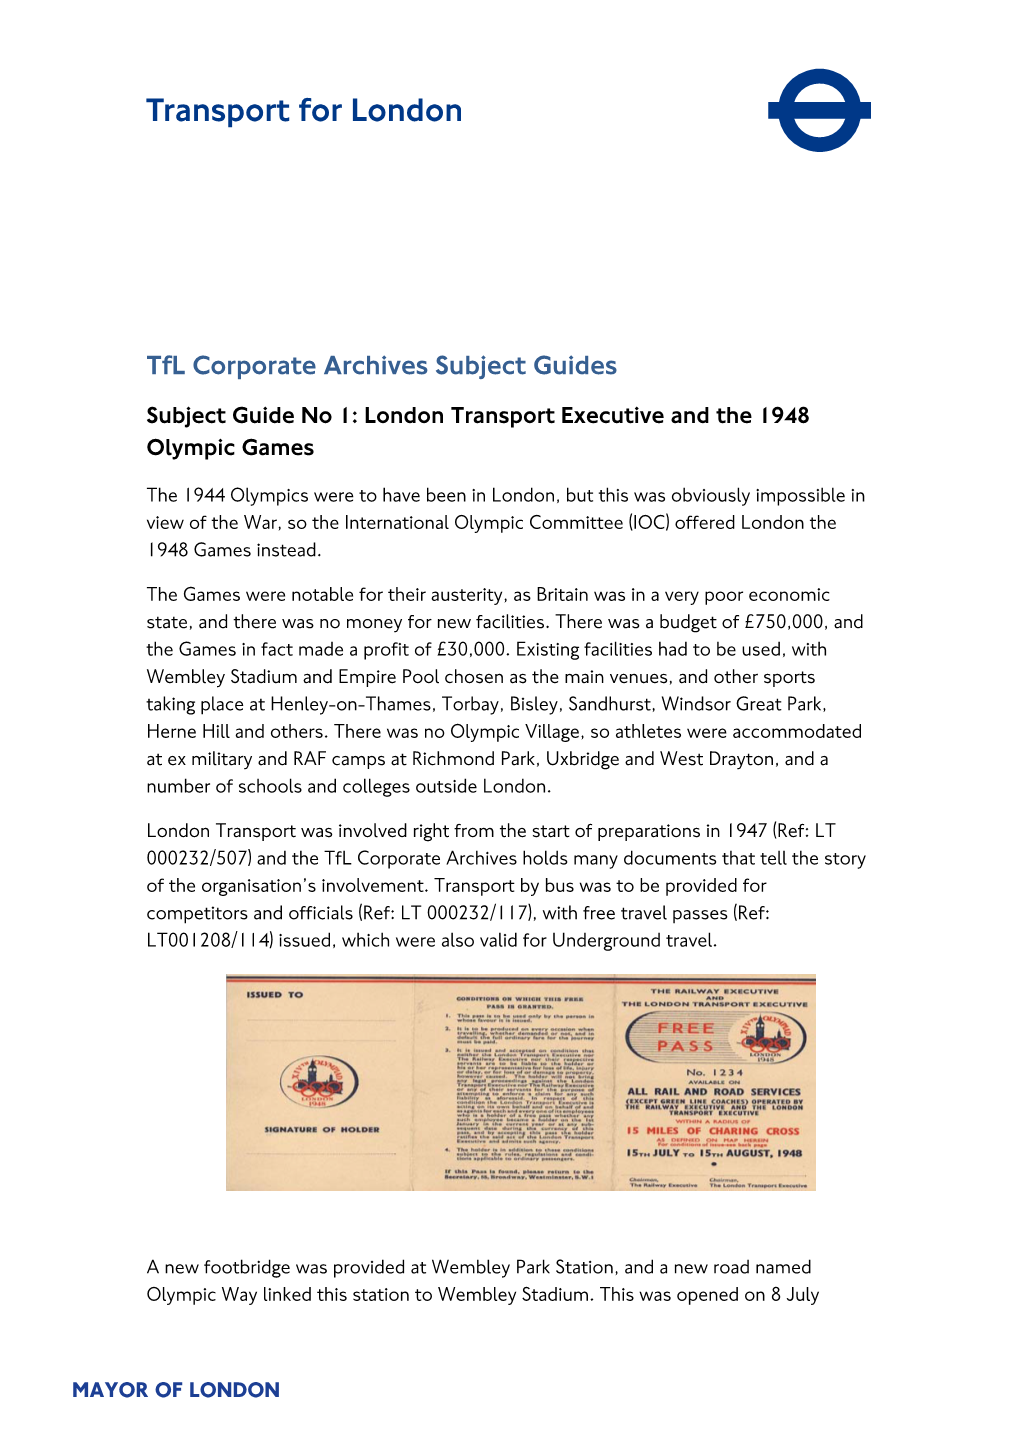 London Transport Executive and the 1948 Olympic Games